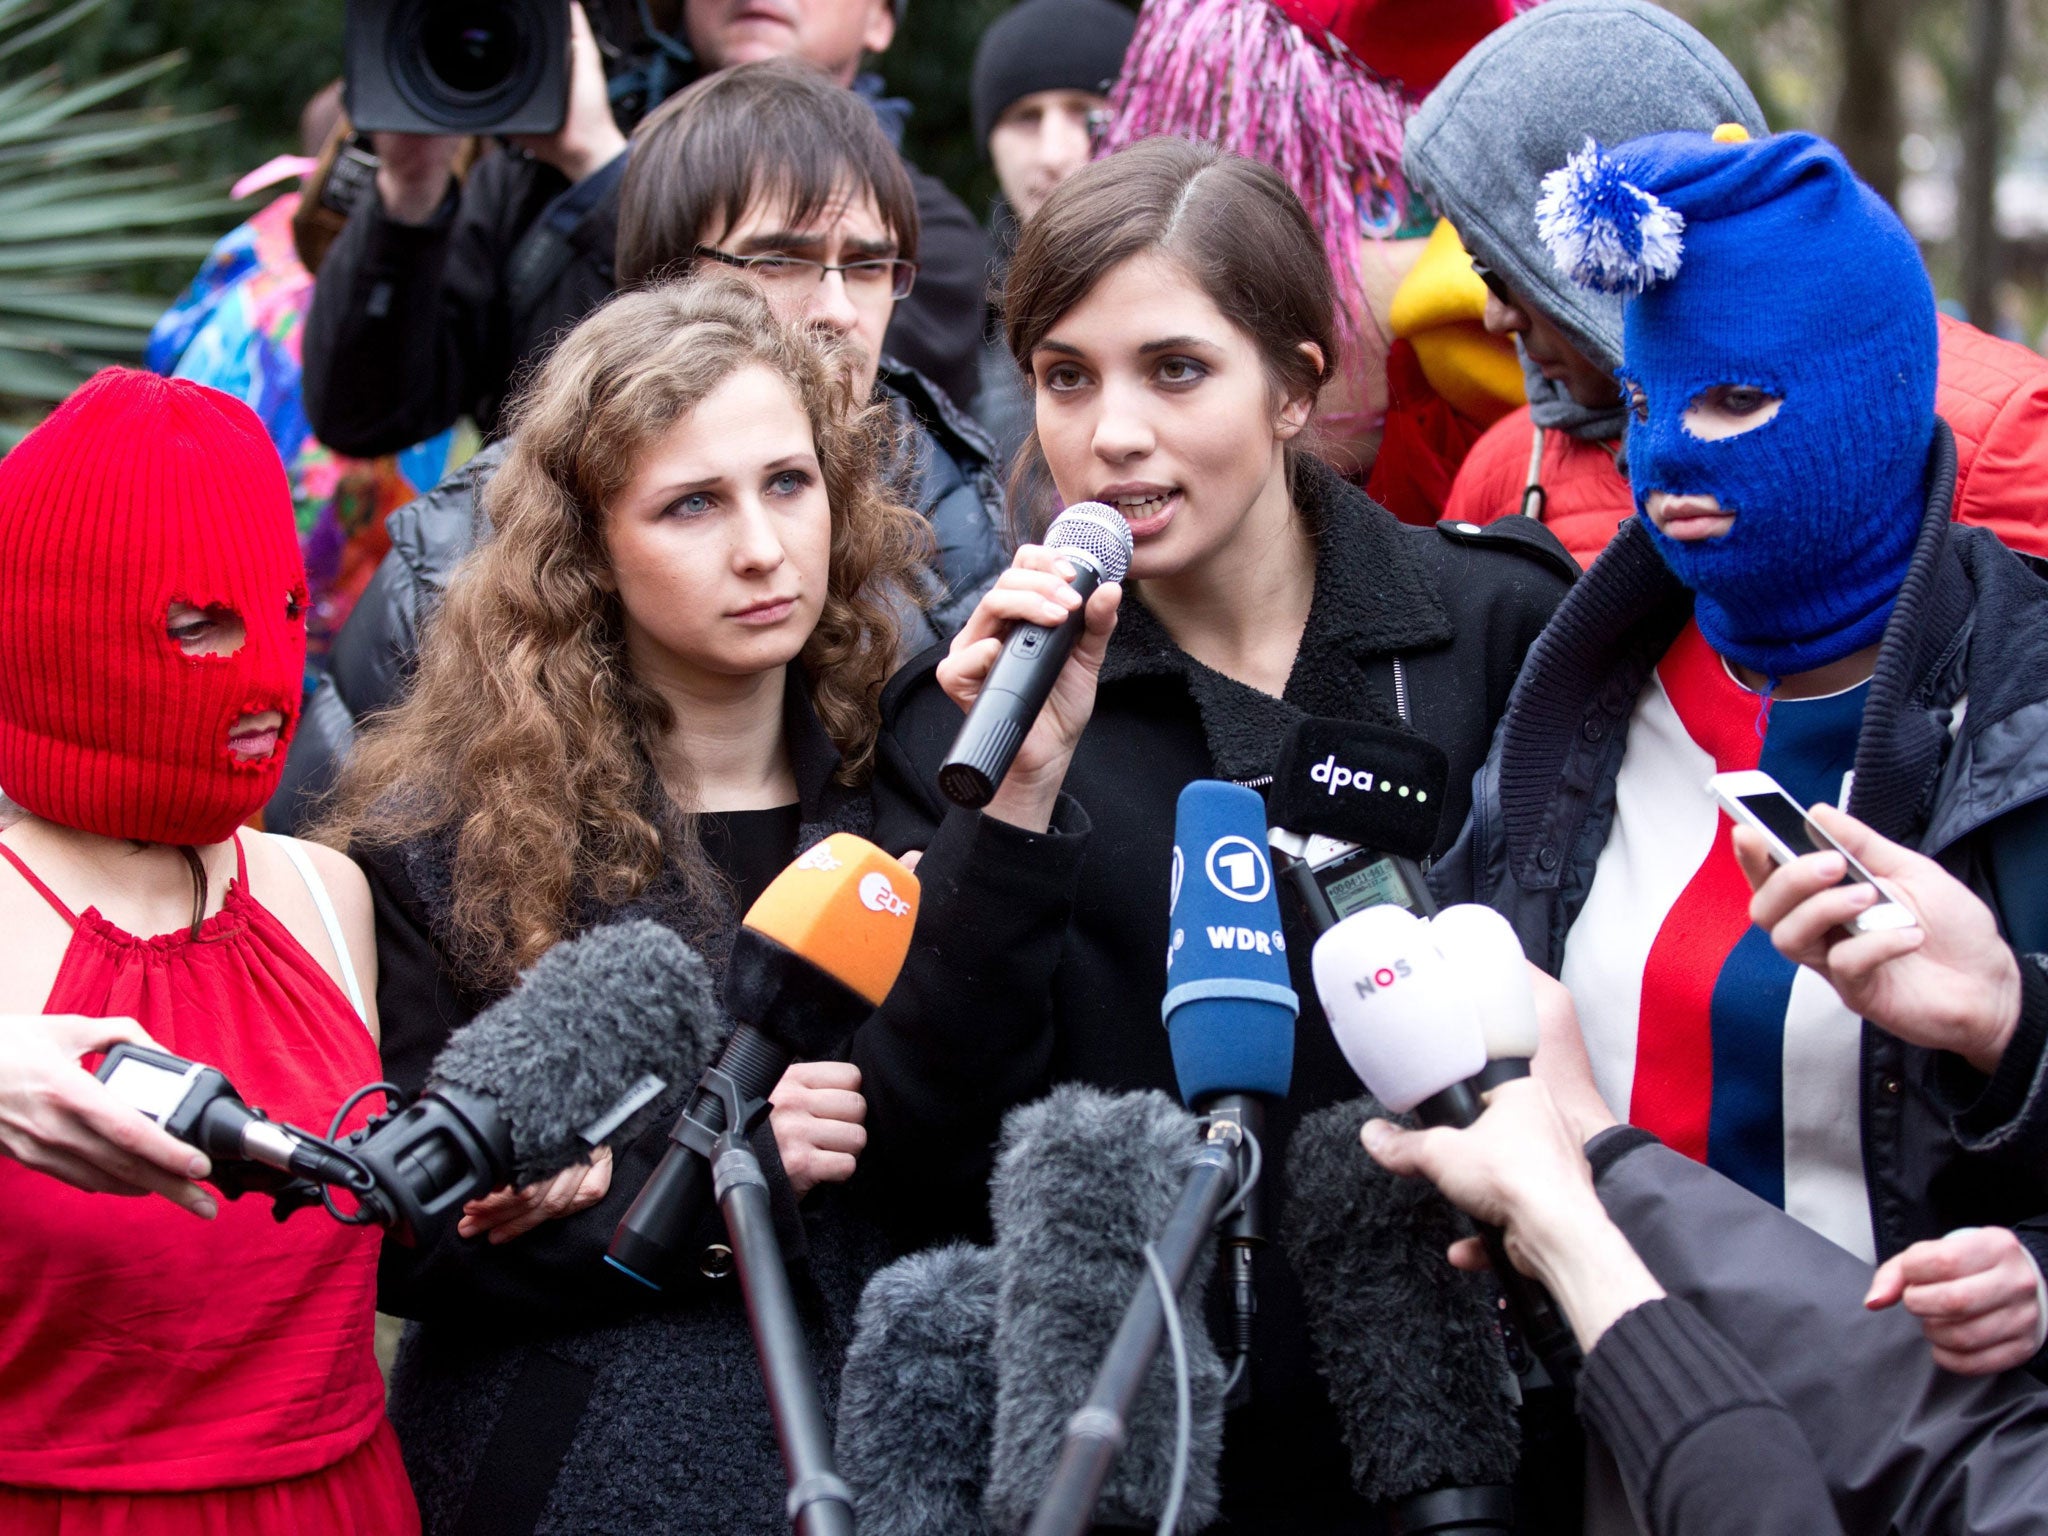 Nadezhda Tolokonnikova (C-R), Maria Alyokhina (C-L), and two masked activists of the punk group Pussy Riot during a news conference held outside a hotel in a park in Sochi